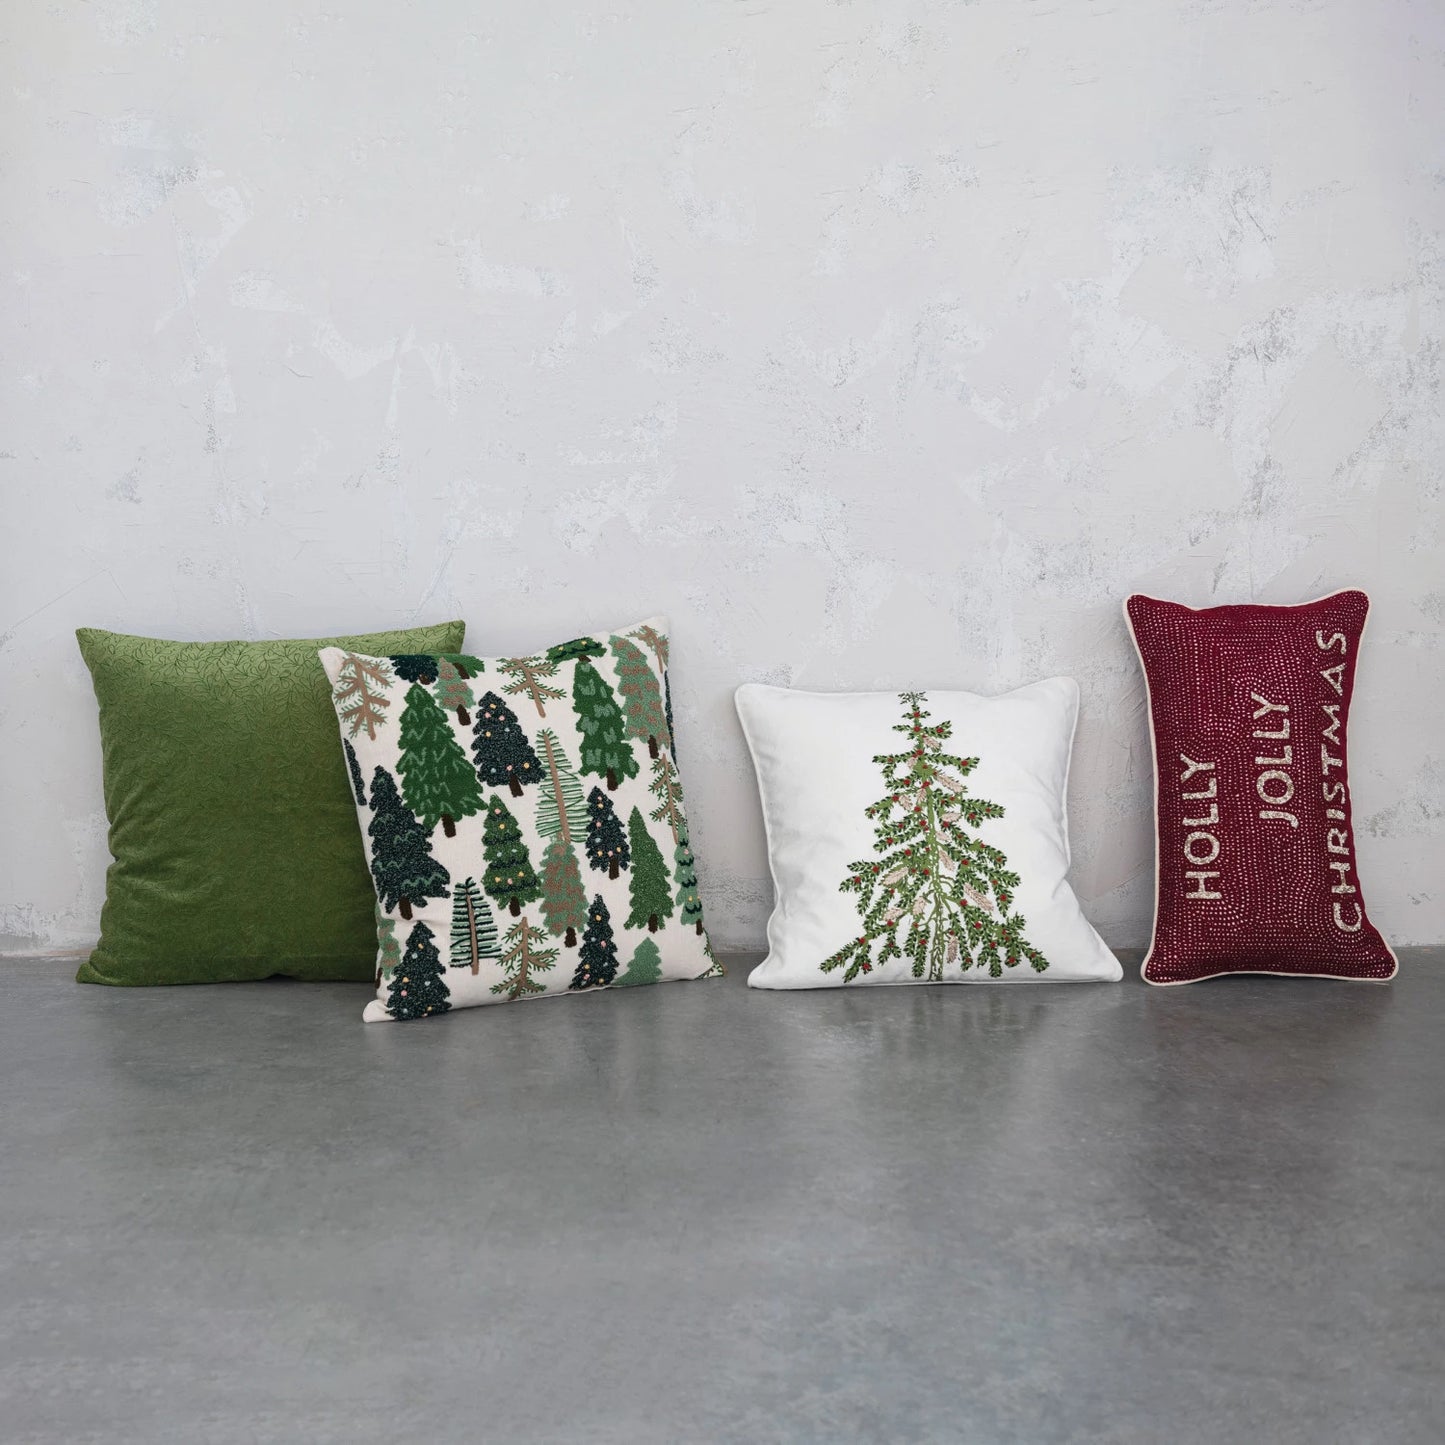 EMBROIDERED TREE PILLOW